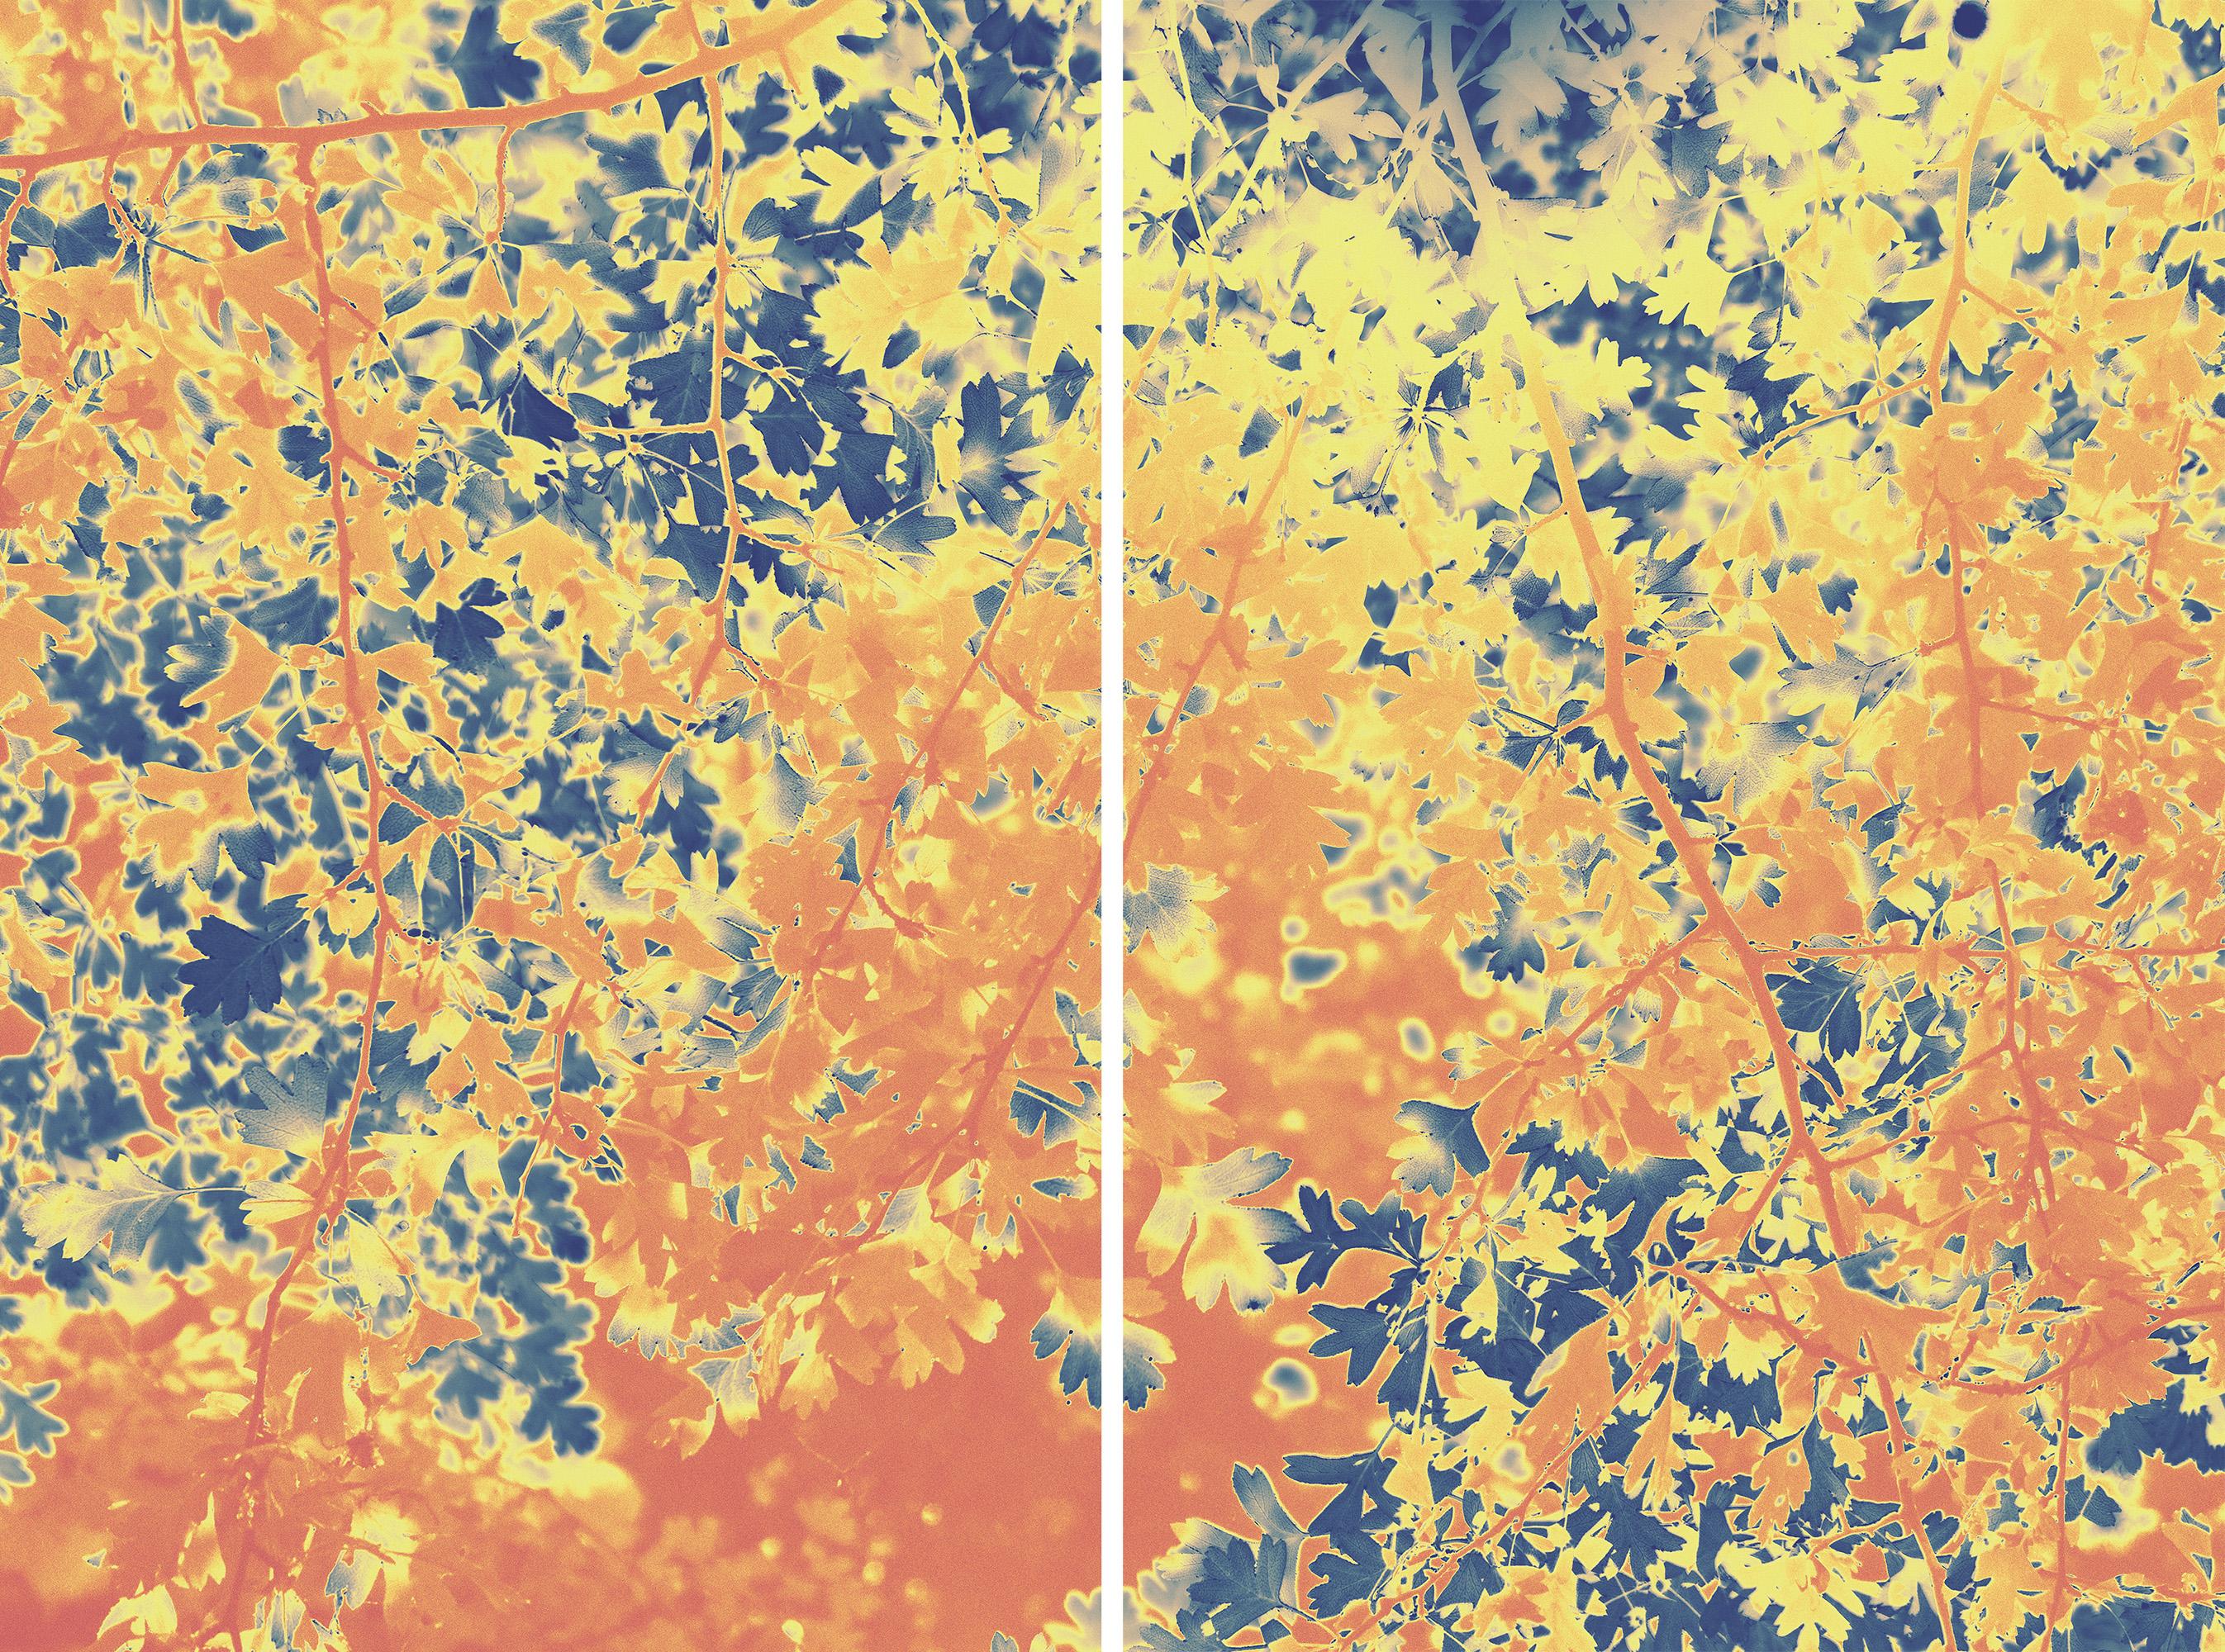 Forest Embers, Giclée Print Diptych Landscape, Warm Tons Abstract Autumn Leaves 